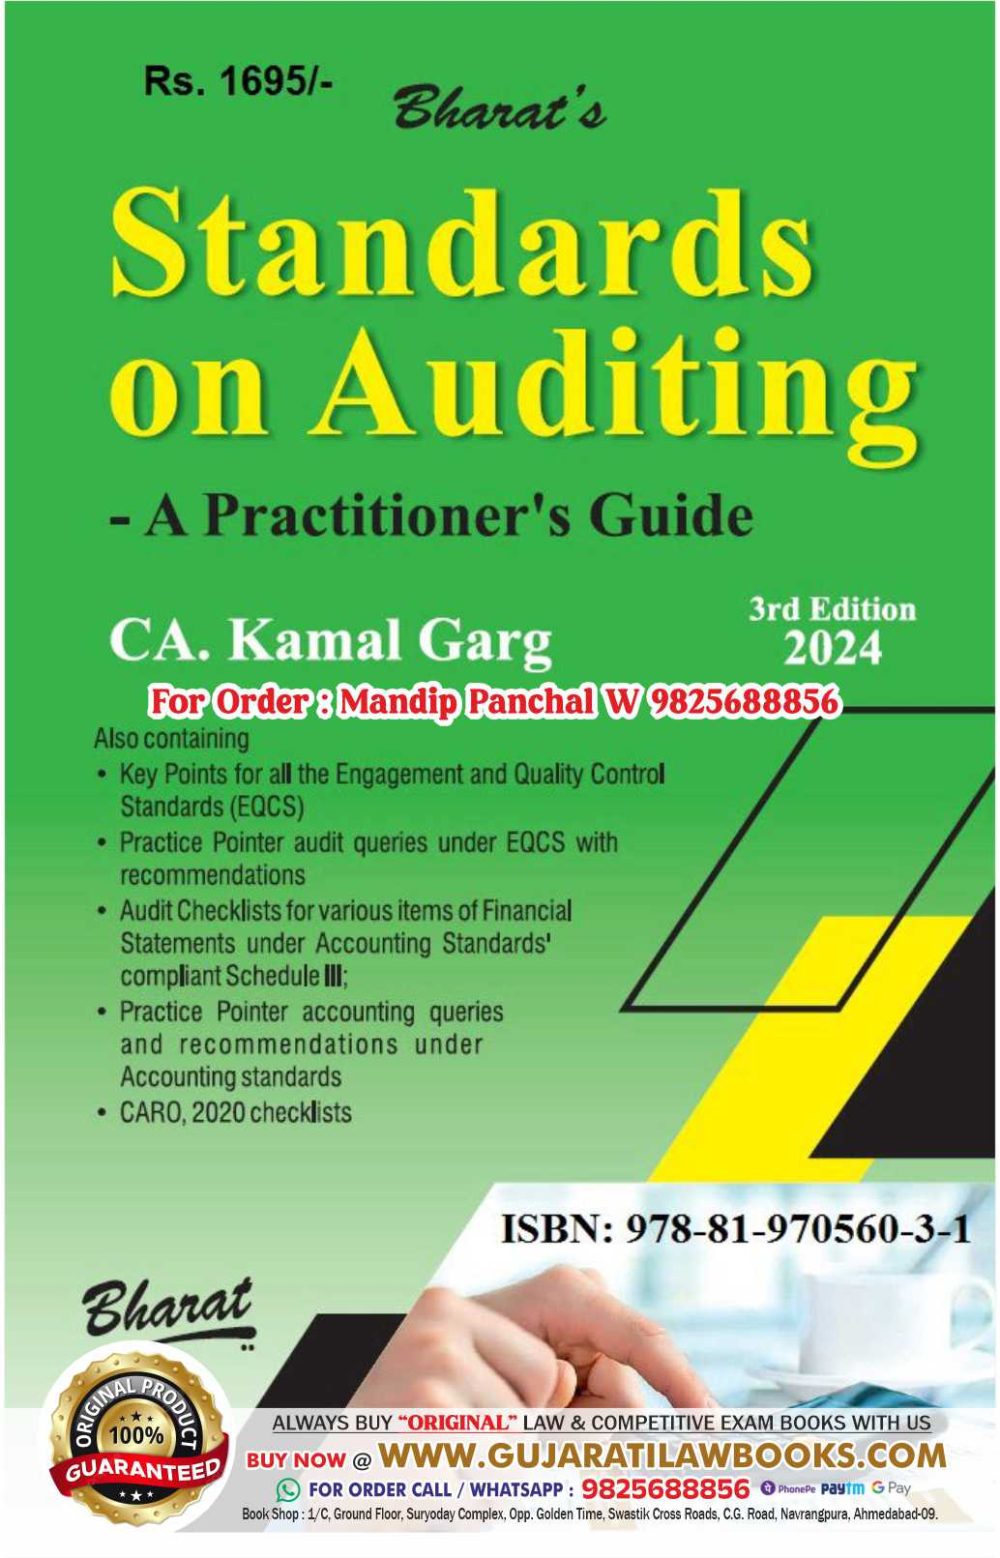 Bharat's STANDARDS ON AUDITING - A Practitioner's Guide - by CA Kaml Garg - Latest 3rd Edition March 2024